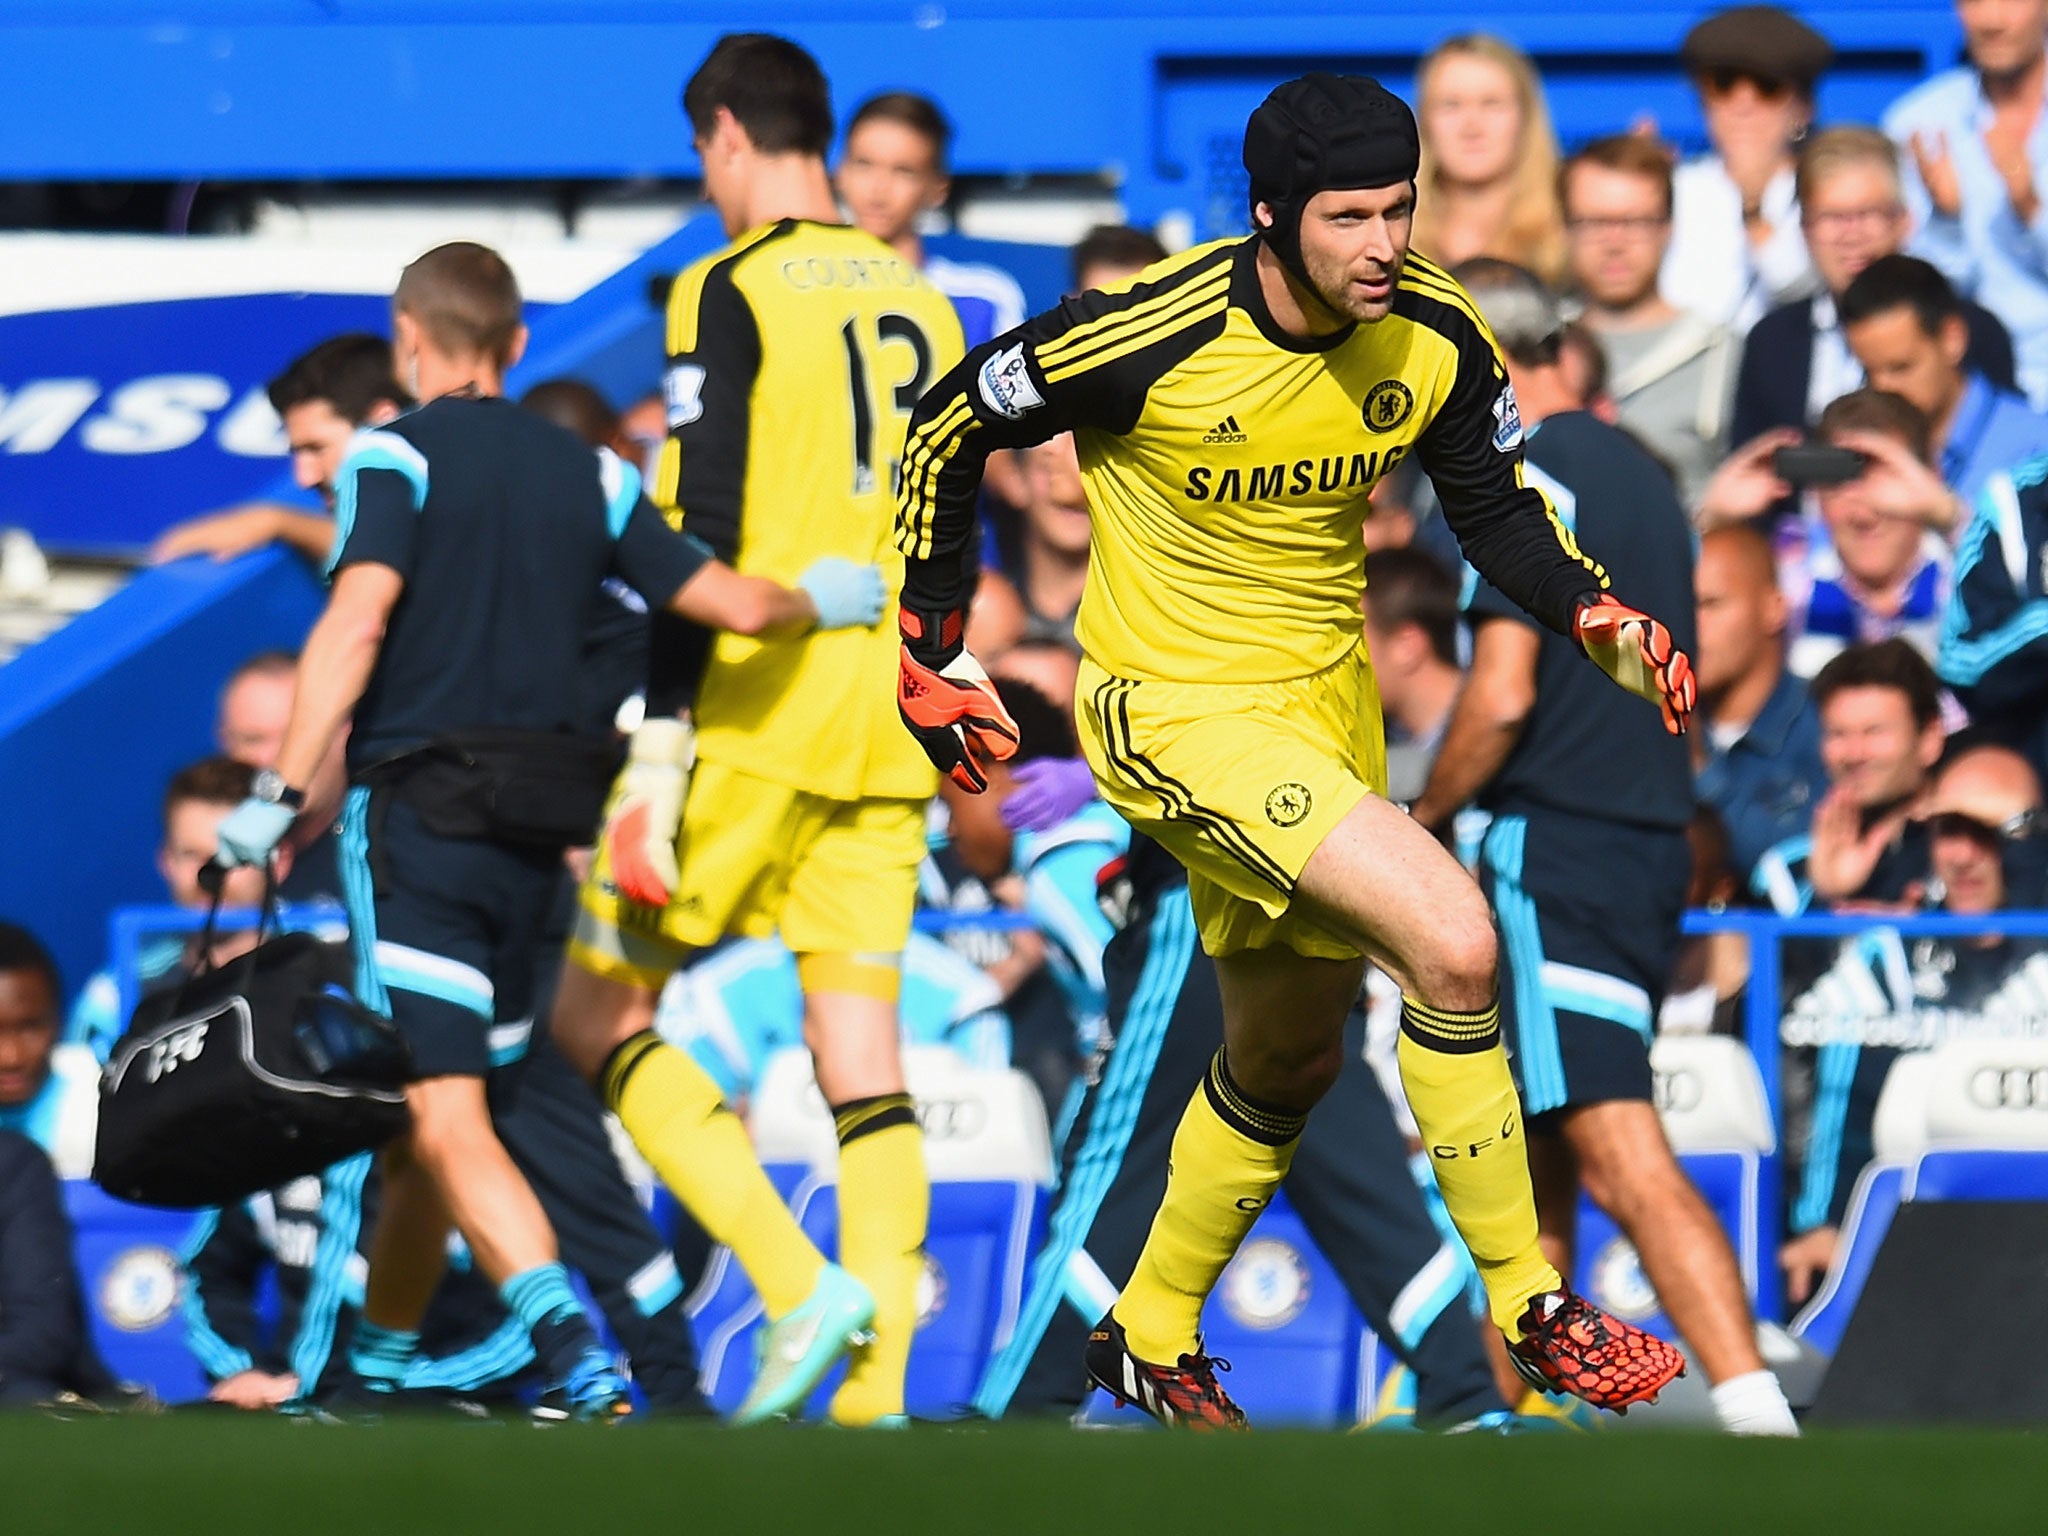 Real's interest in Petr Cech could help Chelsea negotiate